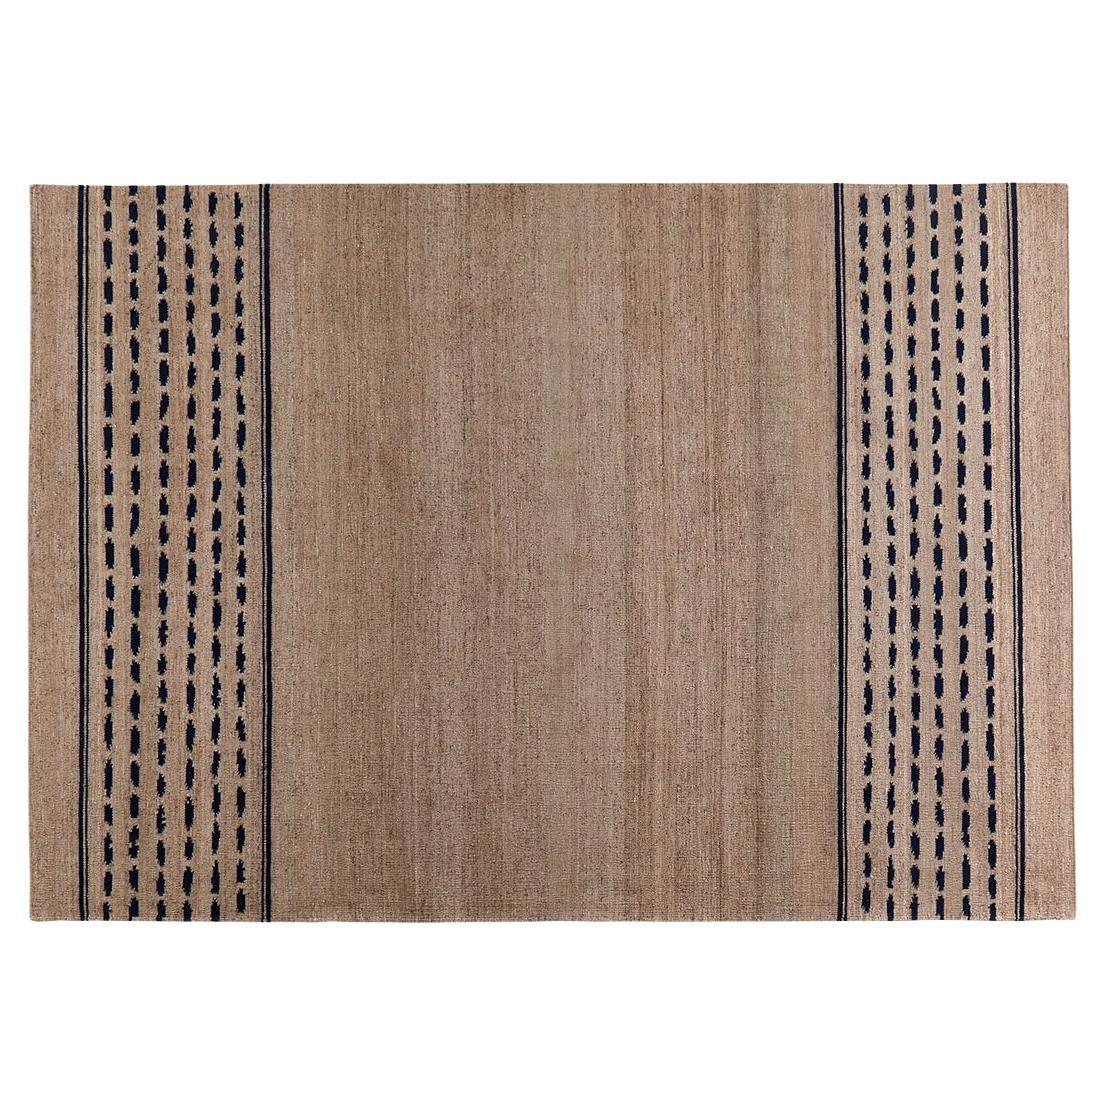 'Dhanu' Rug hand-knotted in sustainable Wool and Allo, 170 x 240 cm